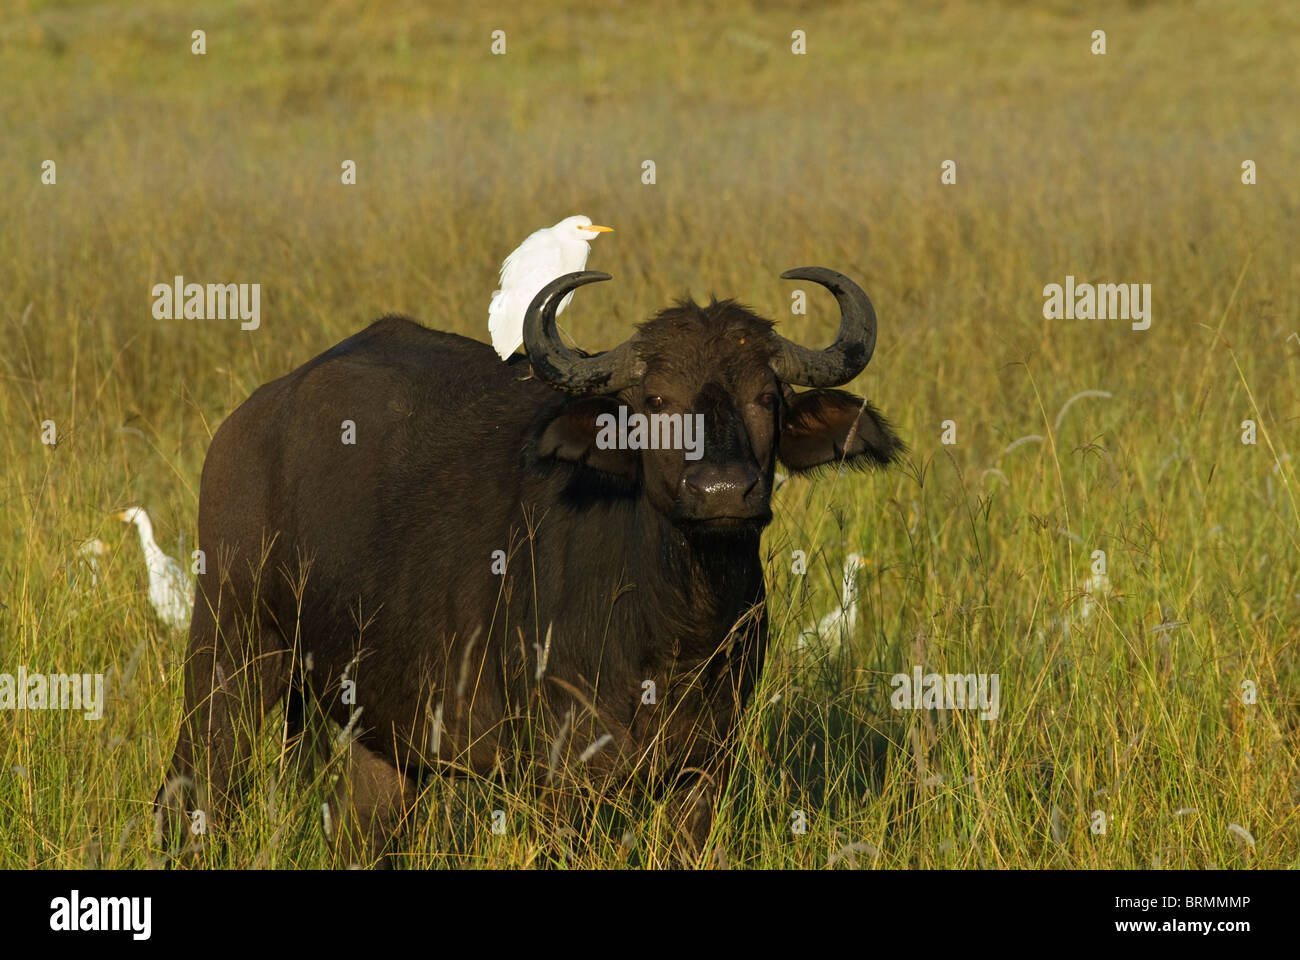 Buffalo with an egret on its back and two standing in the grass along side it Stock Photo